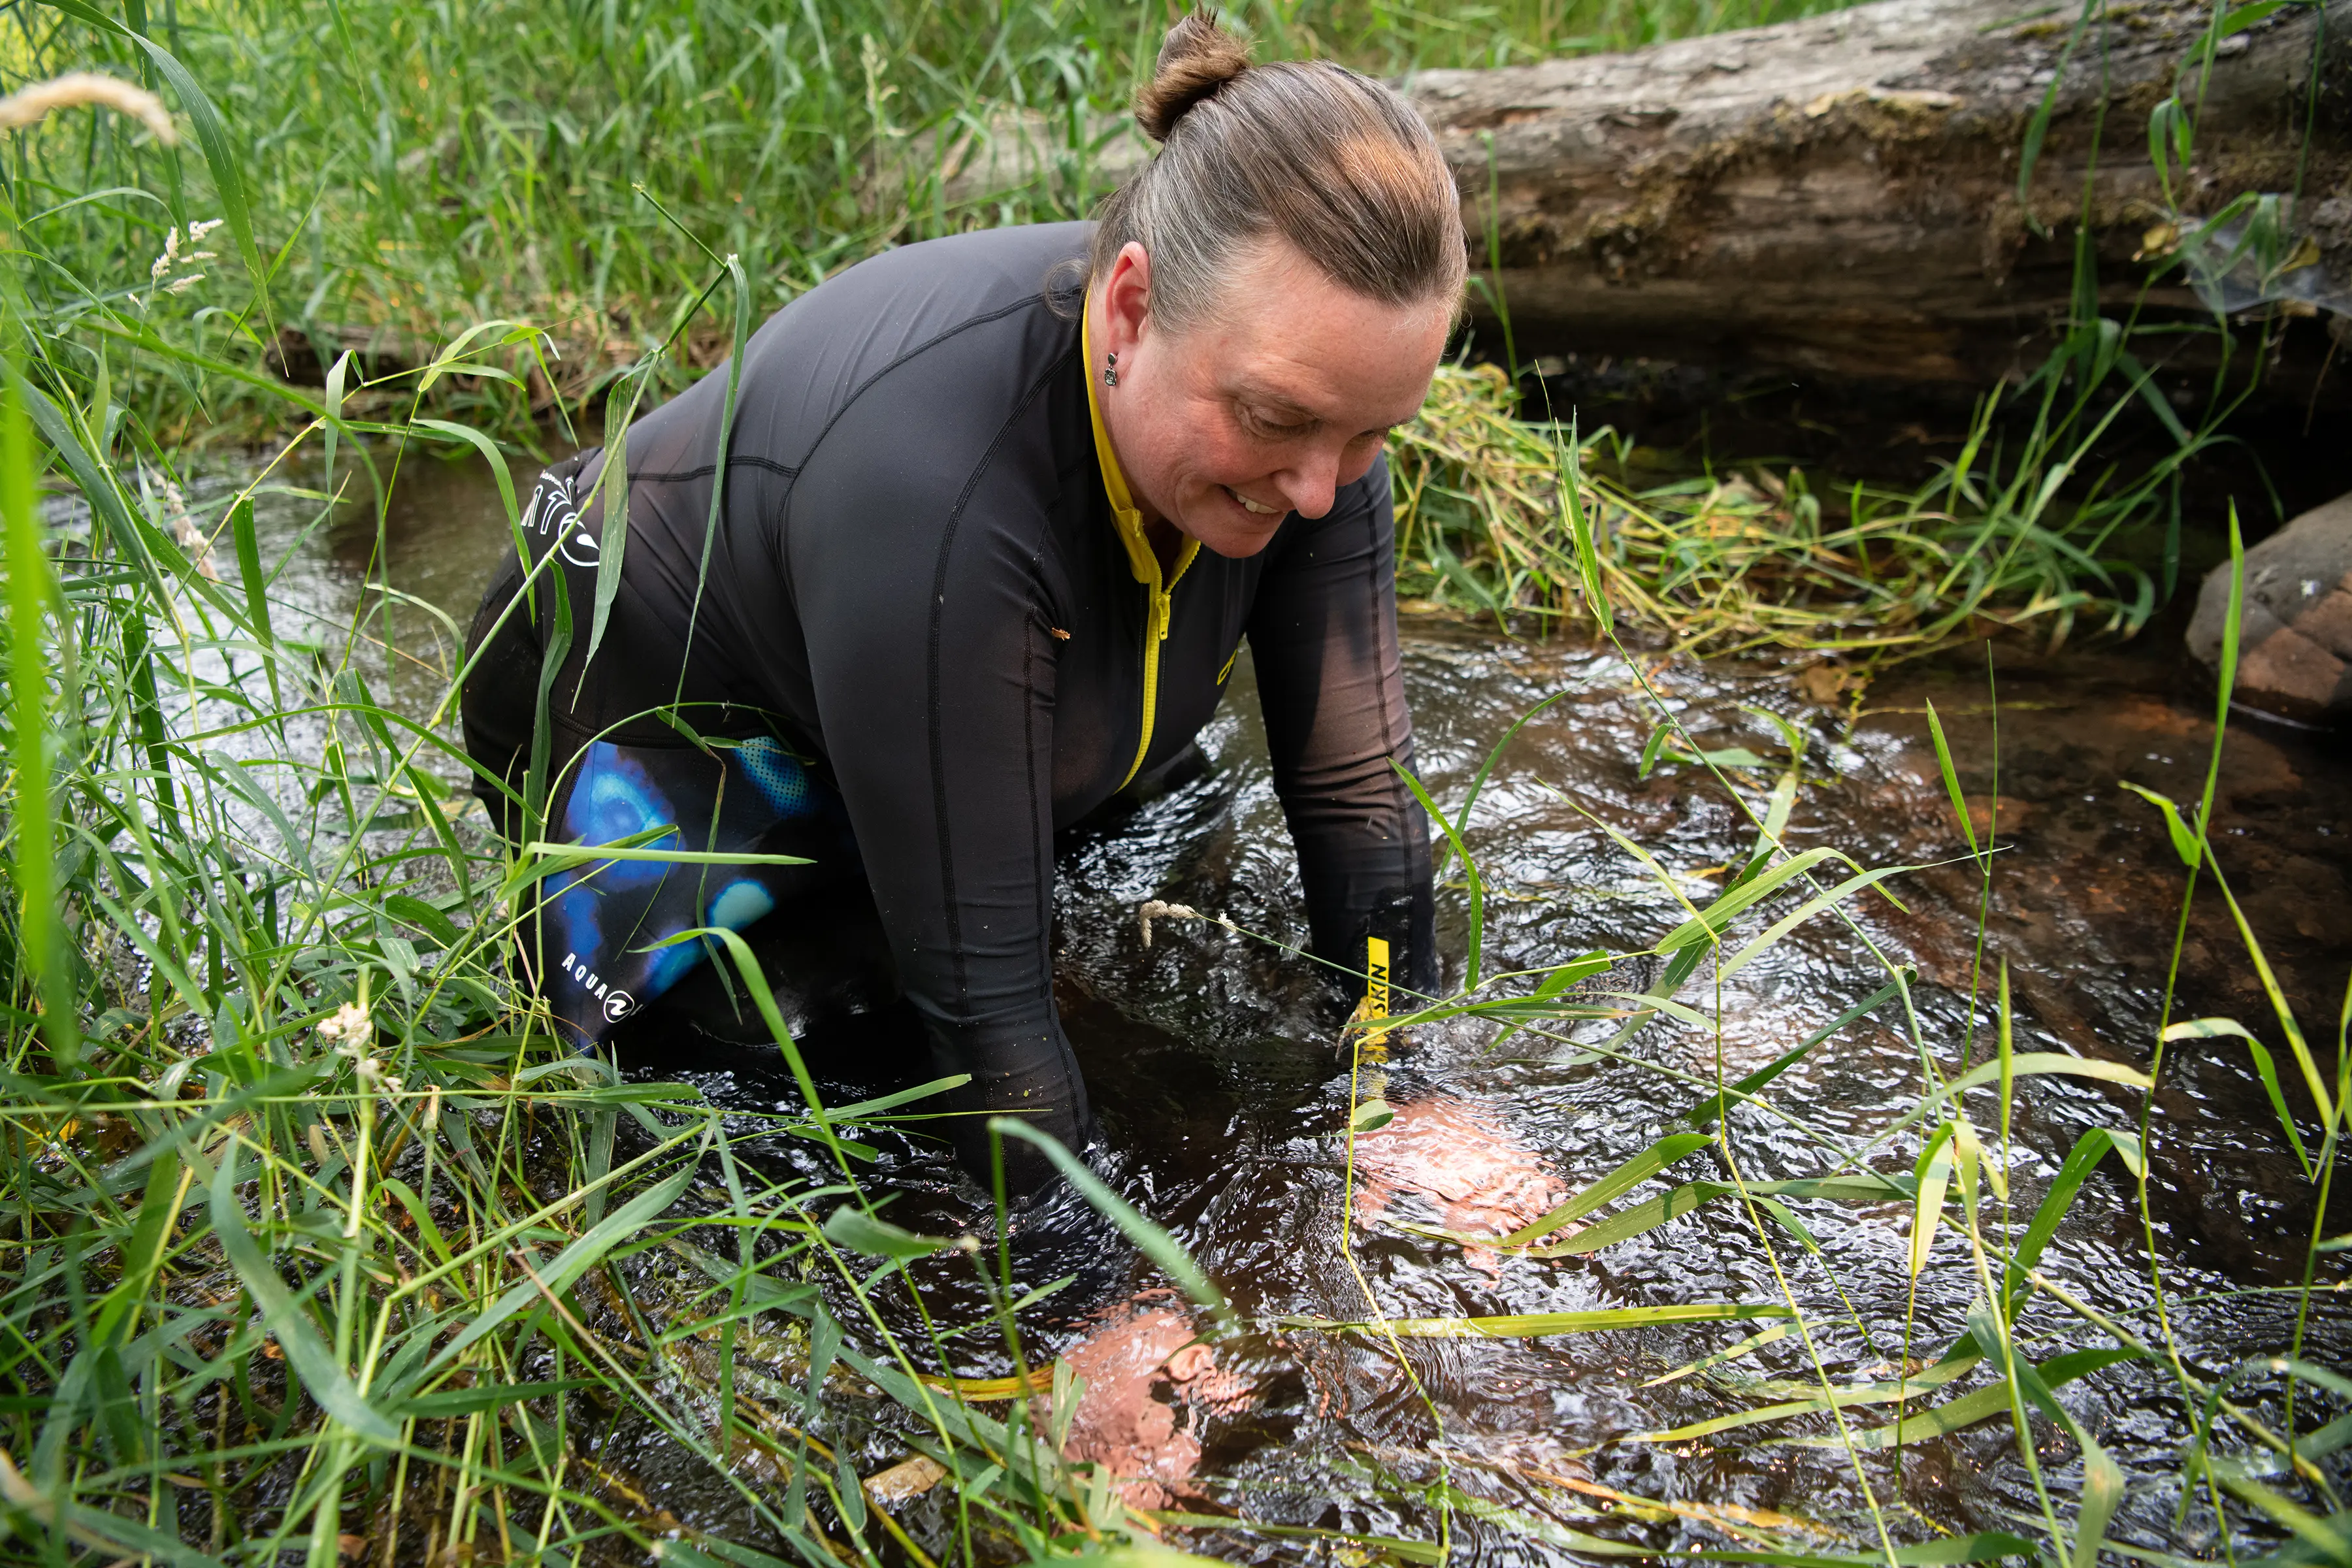 Christine O'Brien hunts for freshwater mussels